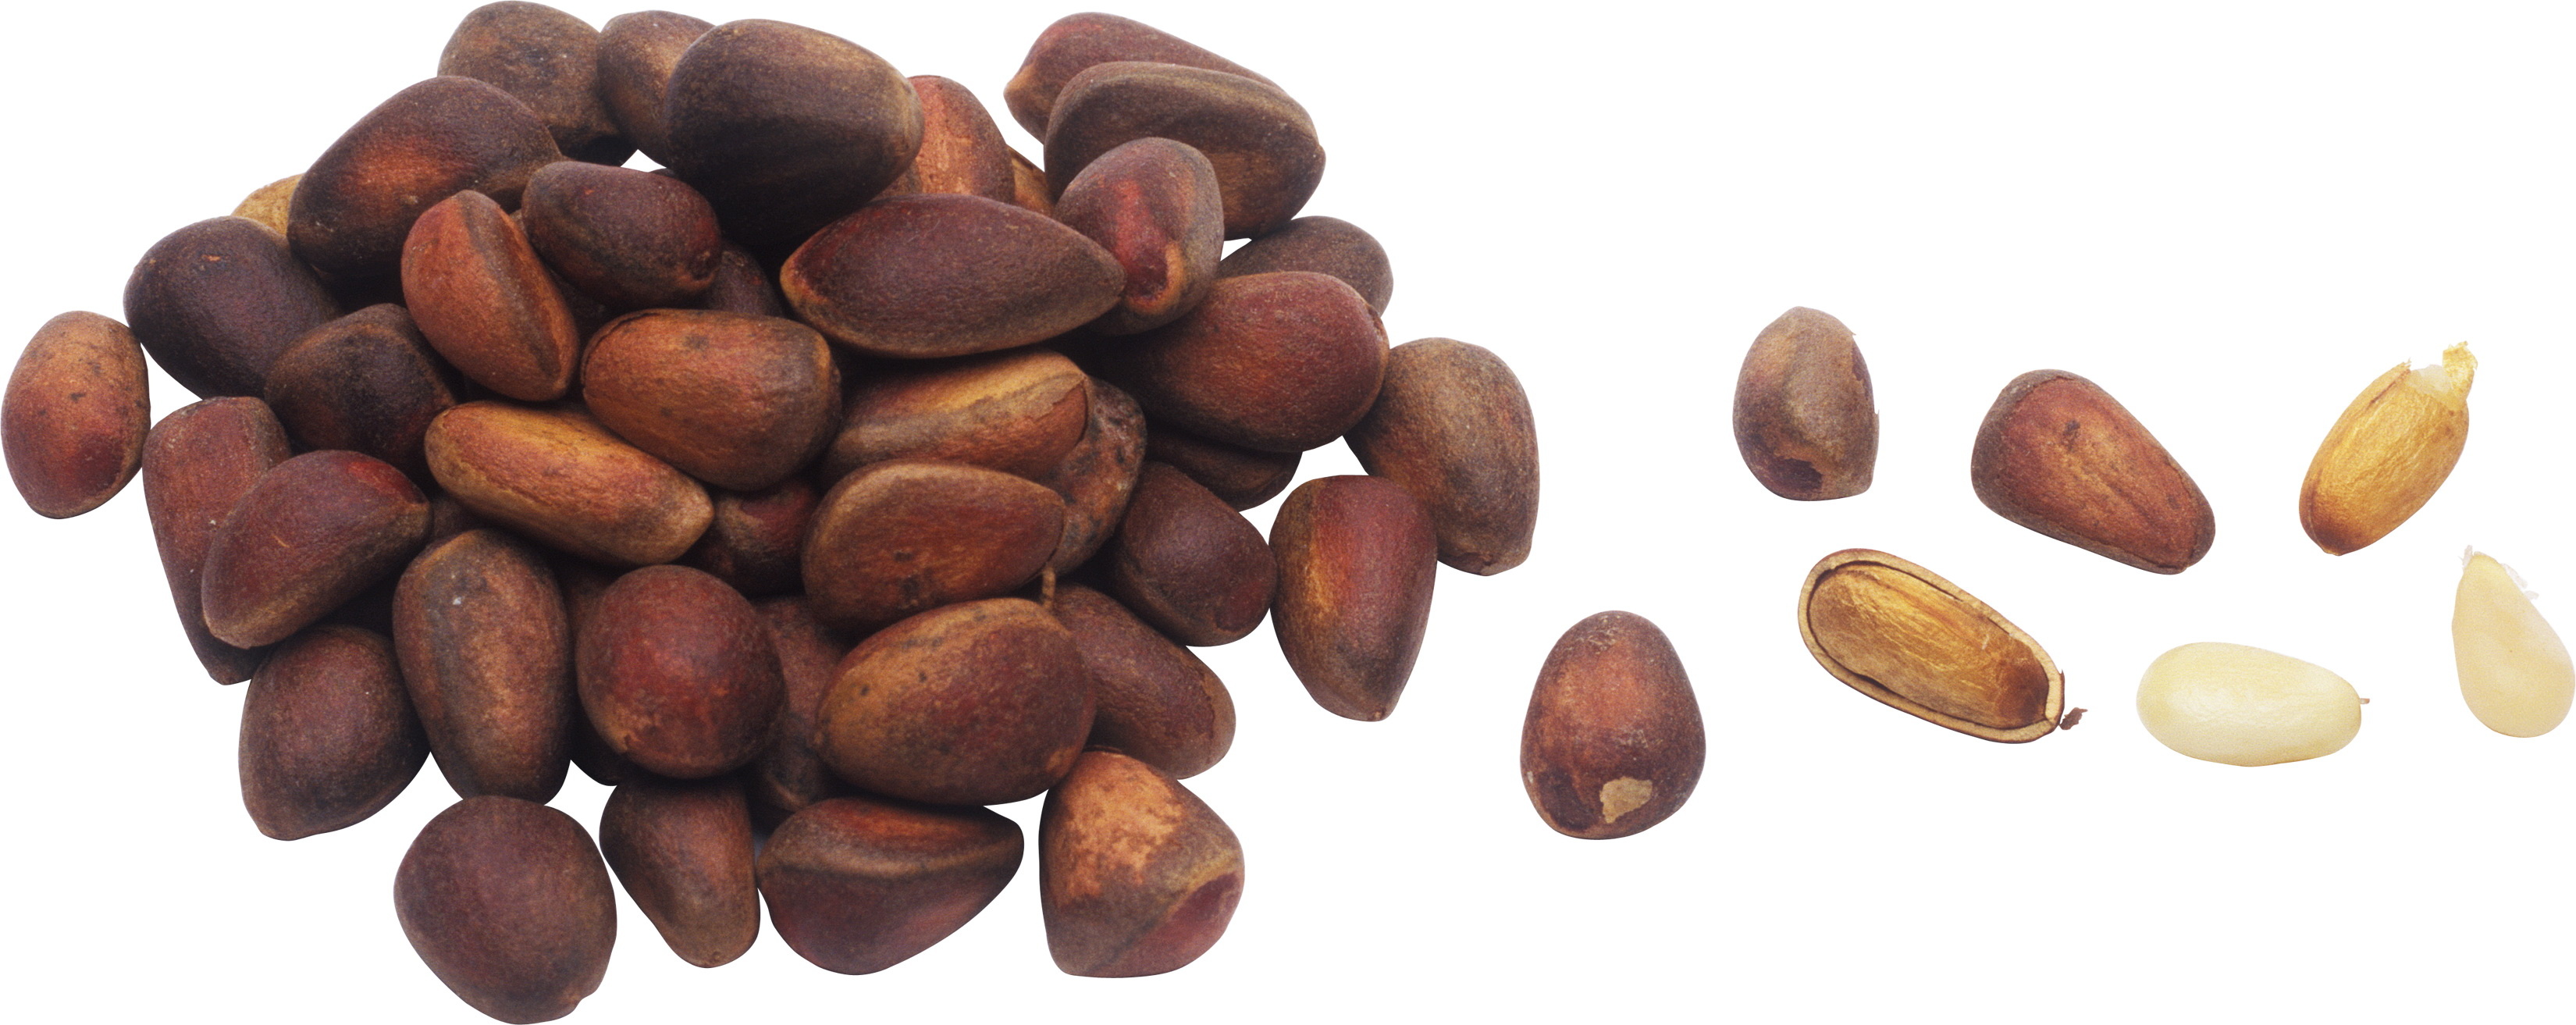 Nutty wallpapers, Nut-themed backgrounds, HD images, Visual delights, 3300x1320 Dual Screen Desktop